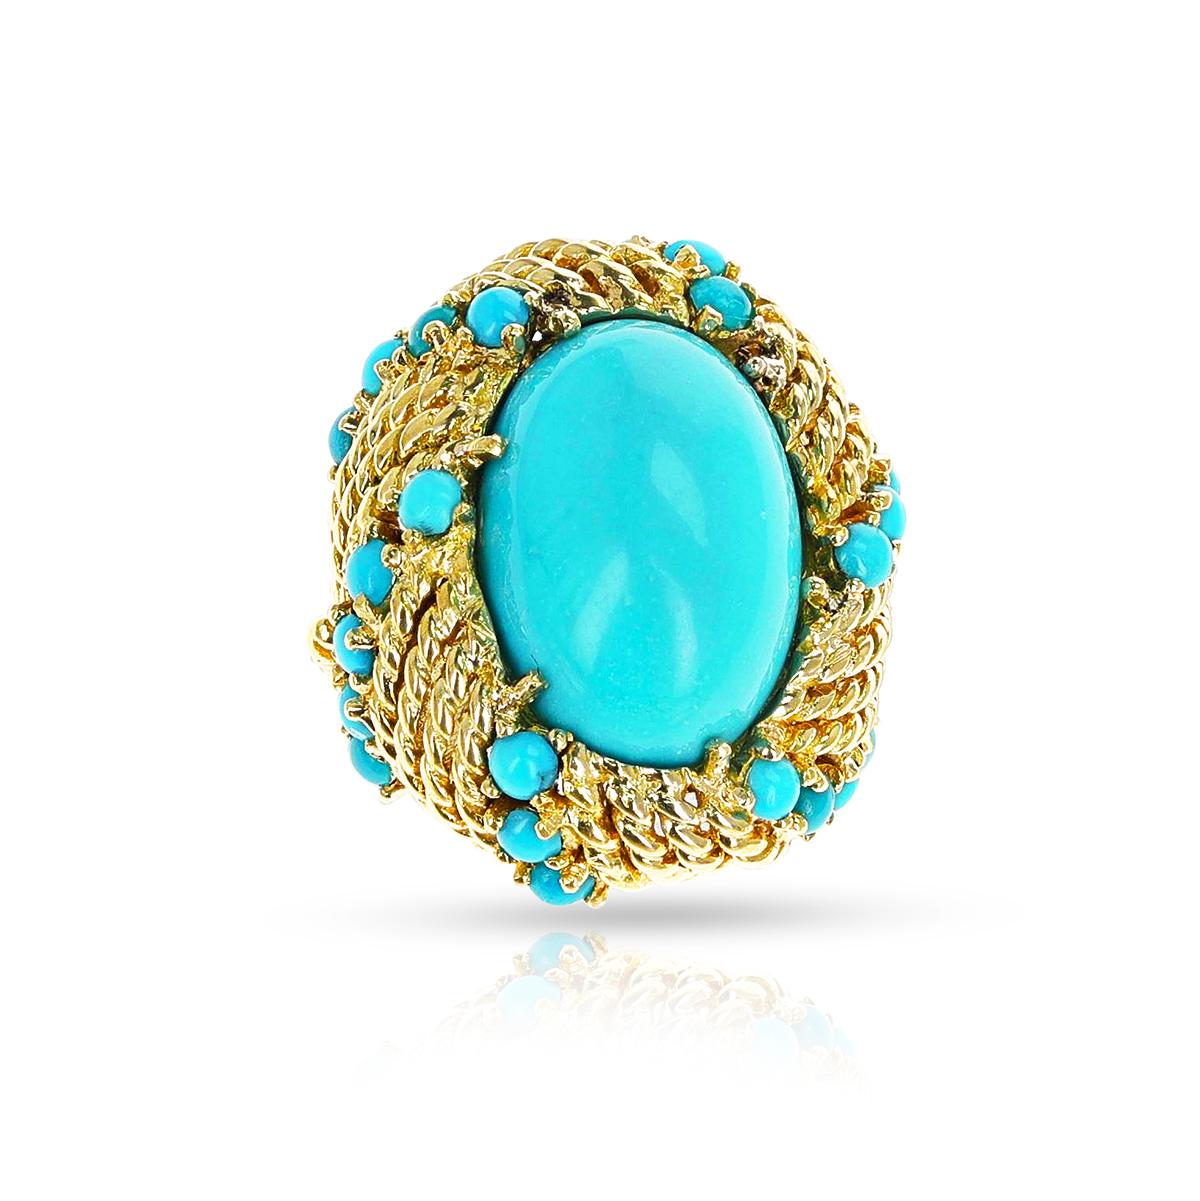 A Turquoise Cabochon Cocktail Ring with Rope-Work Gold made in 18 karat yellow gold. The total weight is 8.58 grams. The ring size is US 4.50.



SKU 1231-RATDJYA